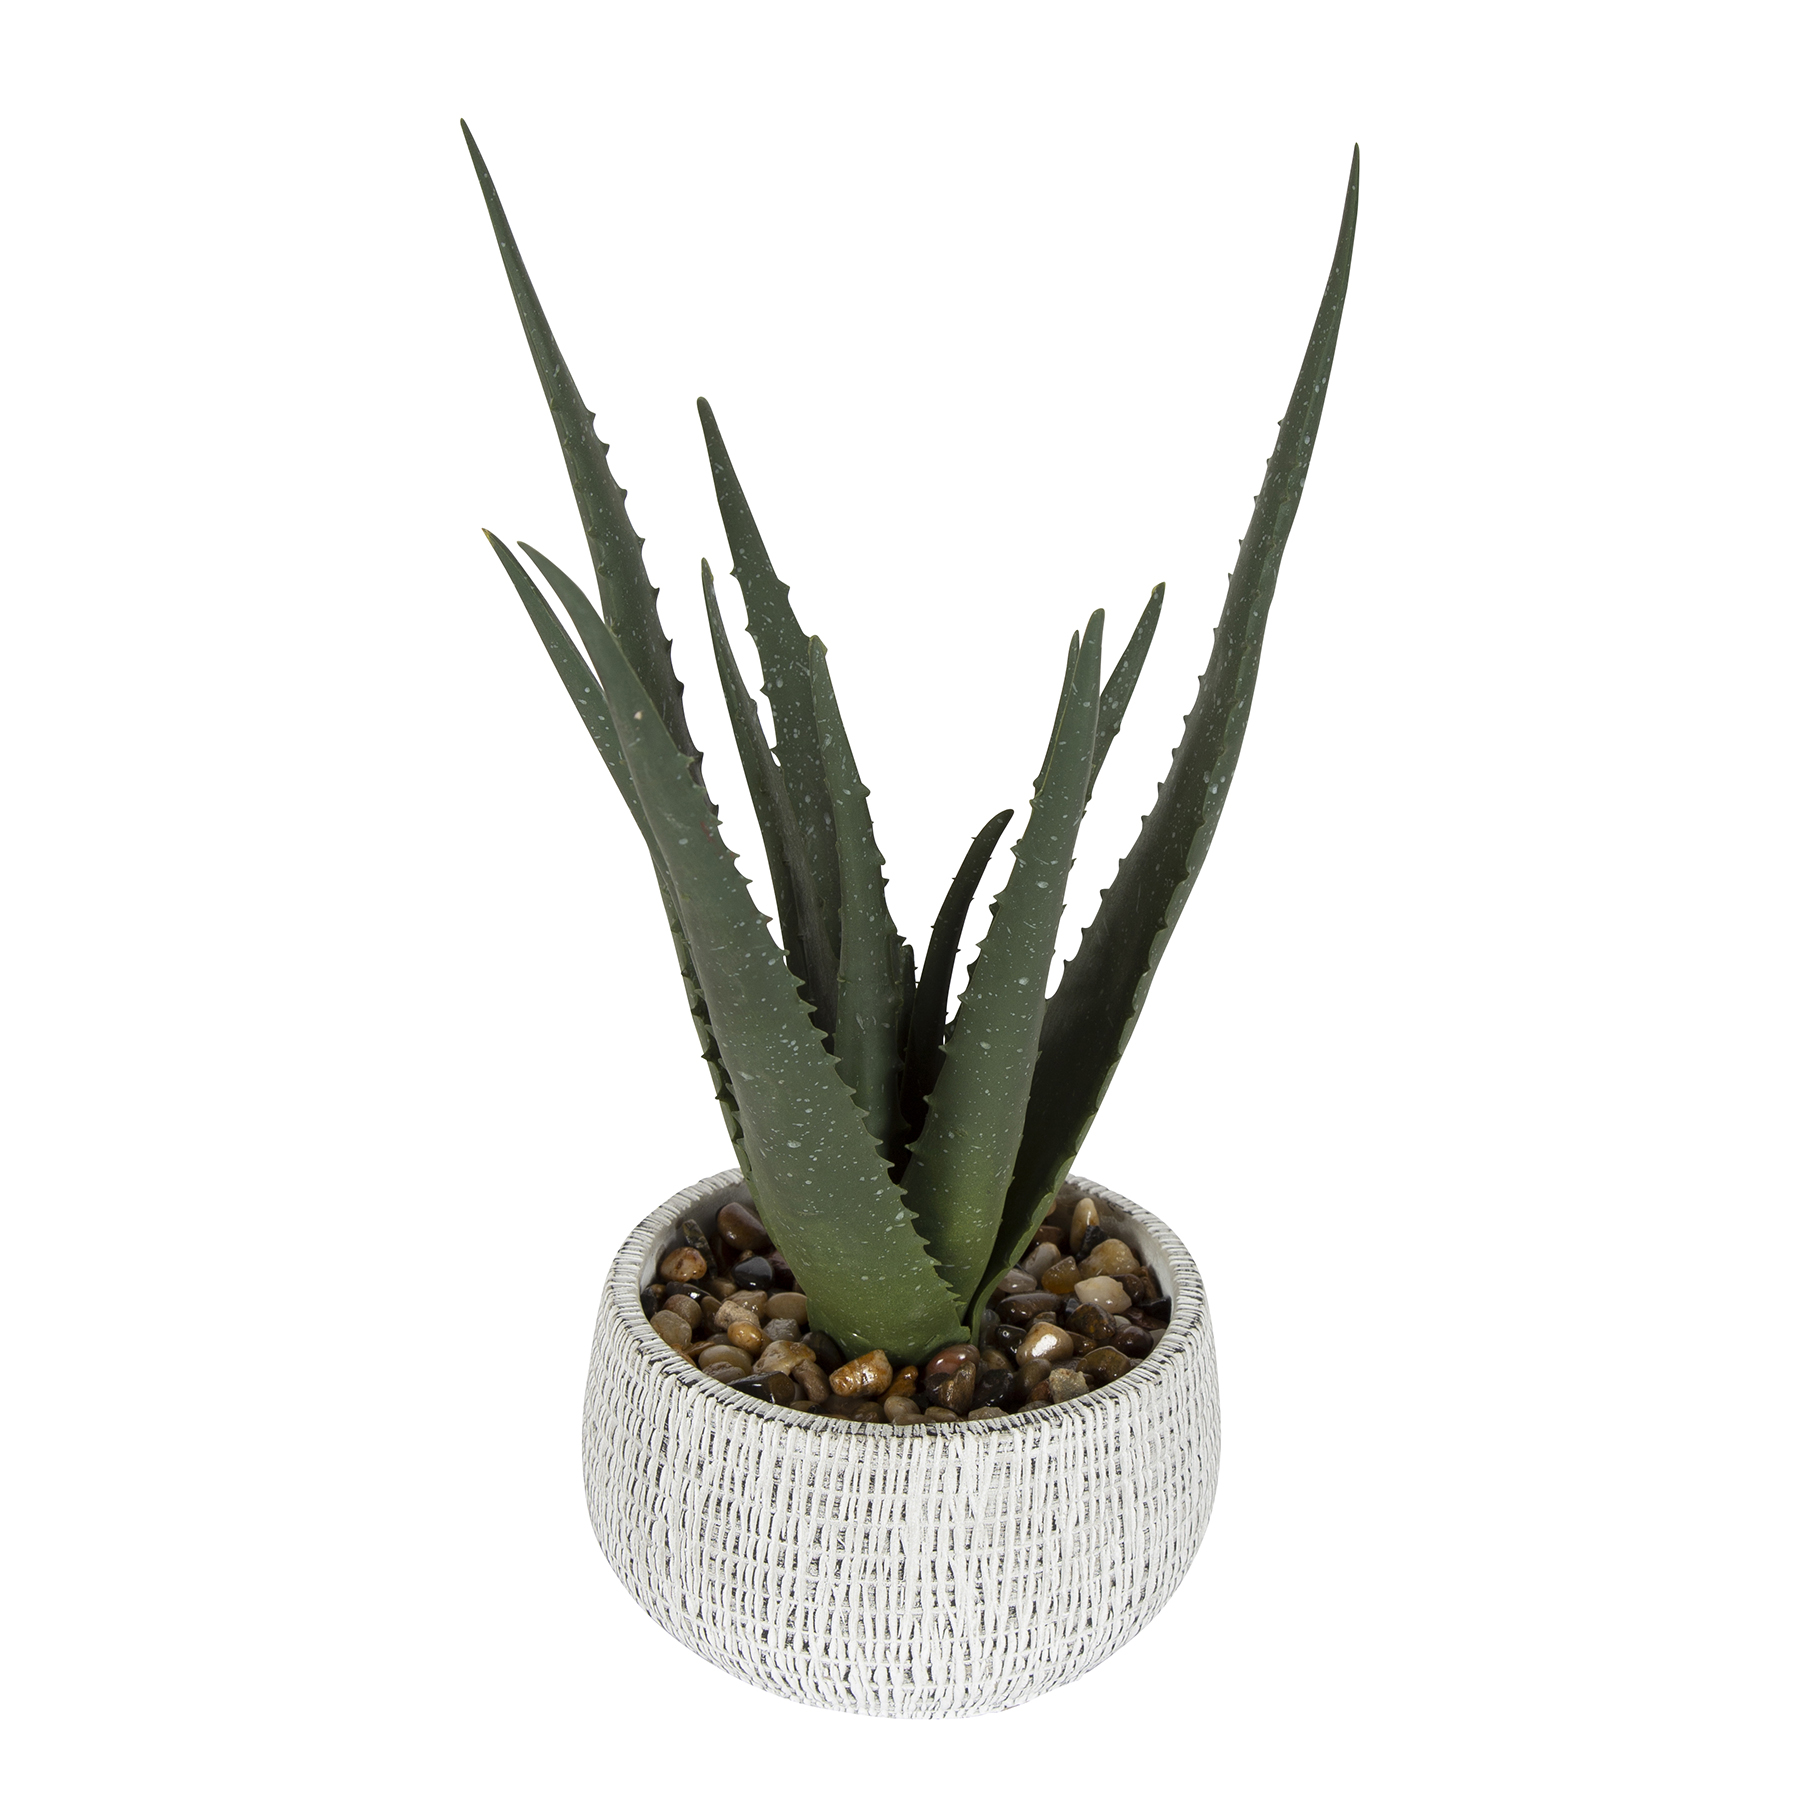 11" Artificial Aloe Plant in White and Black Stone Planter by Better Homes & Gardens - image 4 of 5